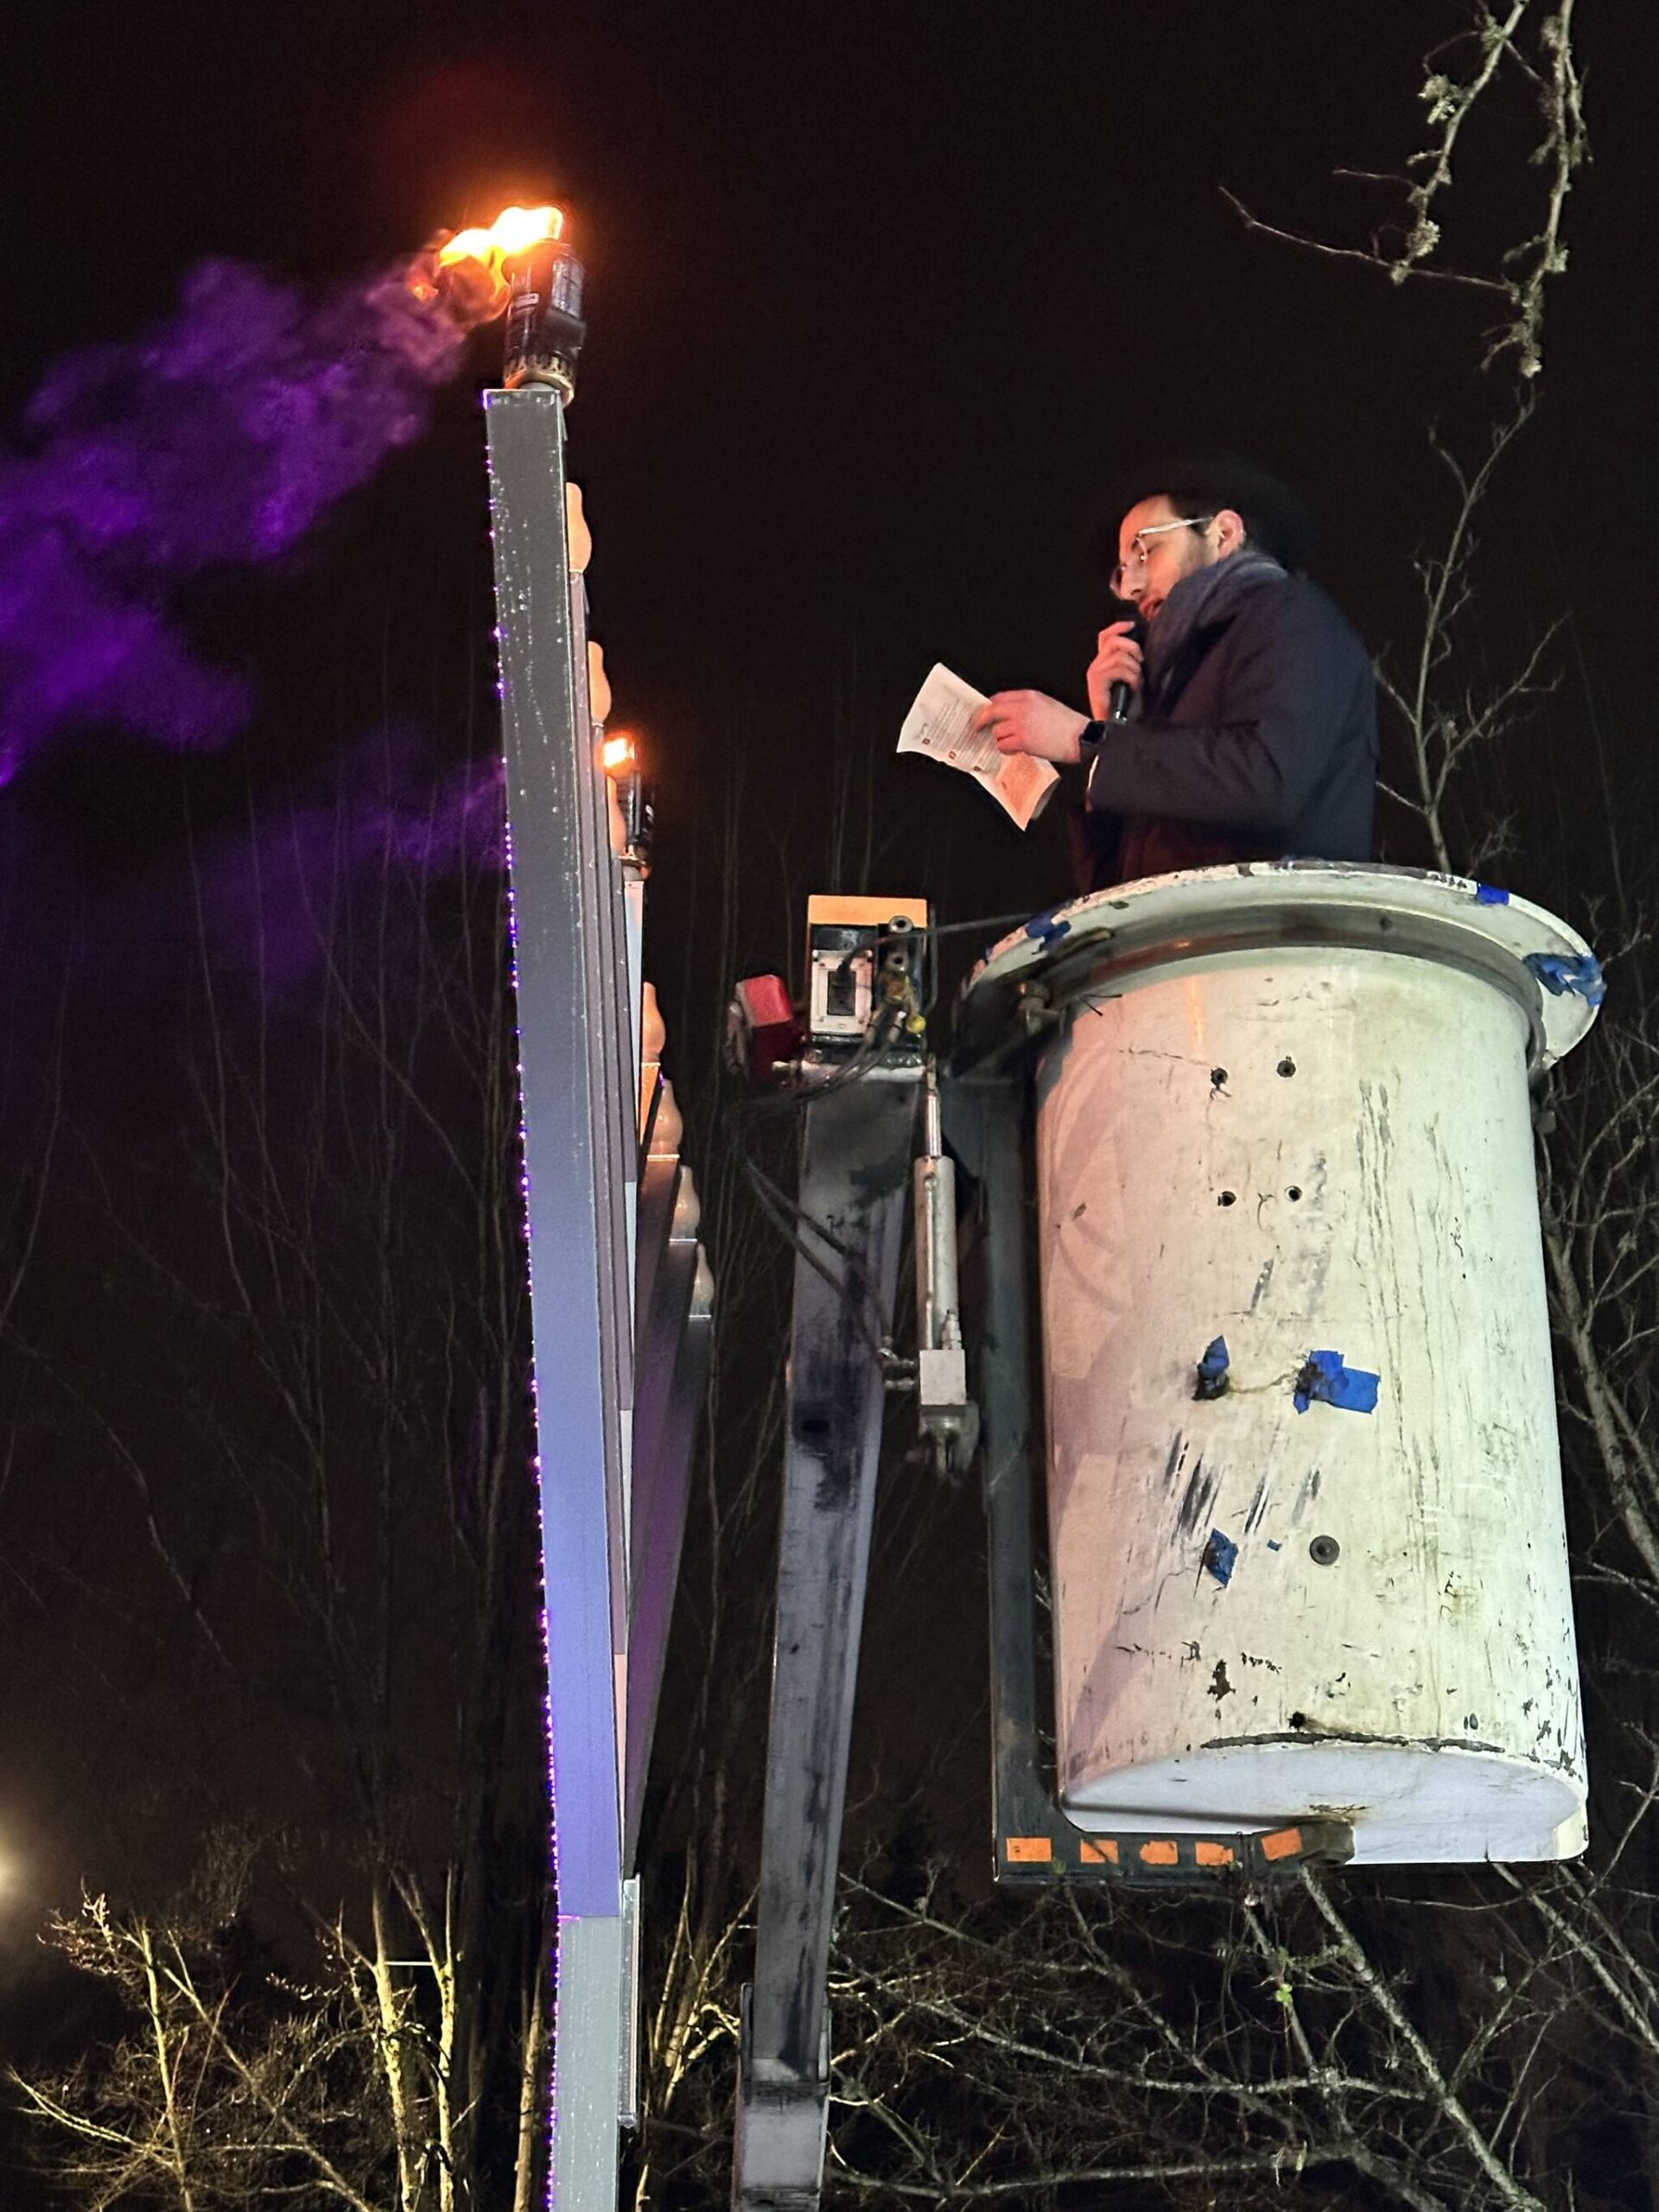 More than 250 people came to the menorah lighting celebration at Mercerdale Park on Dec. 7, the first of the eight days of Chanukah. Rabbi Nissan Kornfeld of Chabad Mercer Island used a bucket lift to reach the top of the 12-foot menorah and light first the middle flame, then one on the right. Chanukah, the Festival of Lights, recalls the victory of more than 2,100 years ago of “a militarily weak but spiritually strong Jewish people over the mighty forces of a ruthless enemy that had overrun the Holy Land and threatened to engulf the land and its people in darkness,” said the printed programs prepared by Chabad. “A little light expels a lot of darkness.” The family-friendly gathering featured live music, hot apple cider, balloon tying, a dreidel game, prayers, blessings and group songs such as “Chanukah, Oh Chanukah, come light the Menorah. Let’s have a party, we’ll all dance the hora.” About 20% of Mercer Island residents are Jewish, and recent antisemitic incidents on the Island made this year’s event especially important, many participants said. Photo courtesy of Greg Asimakoupoulos